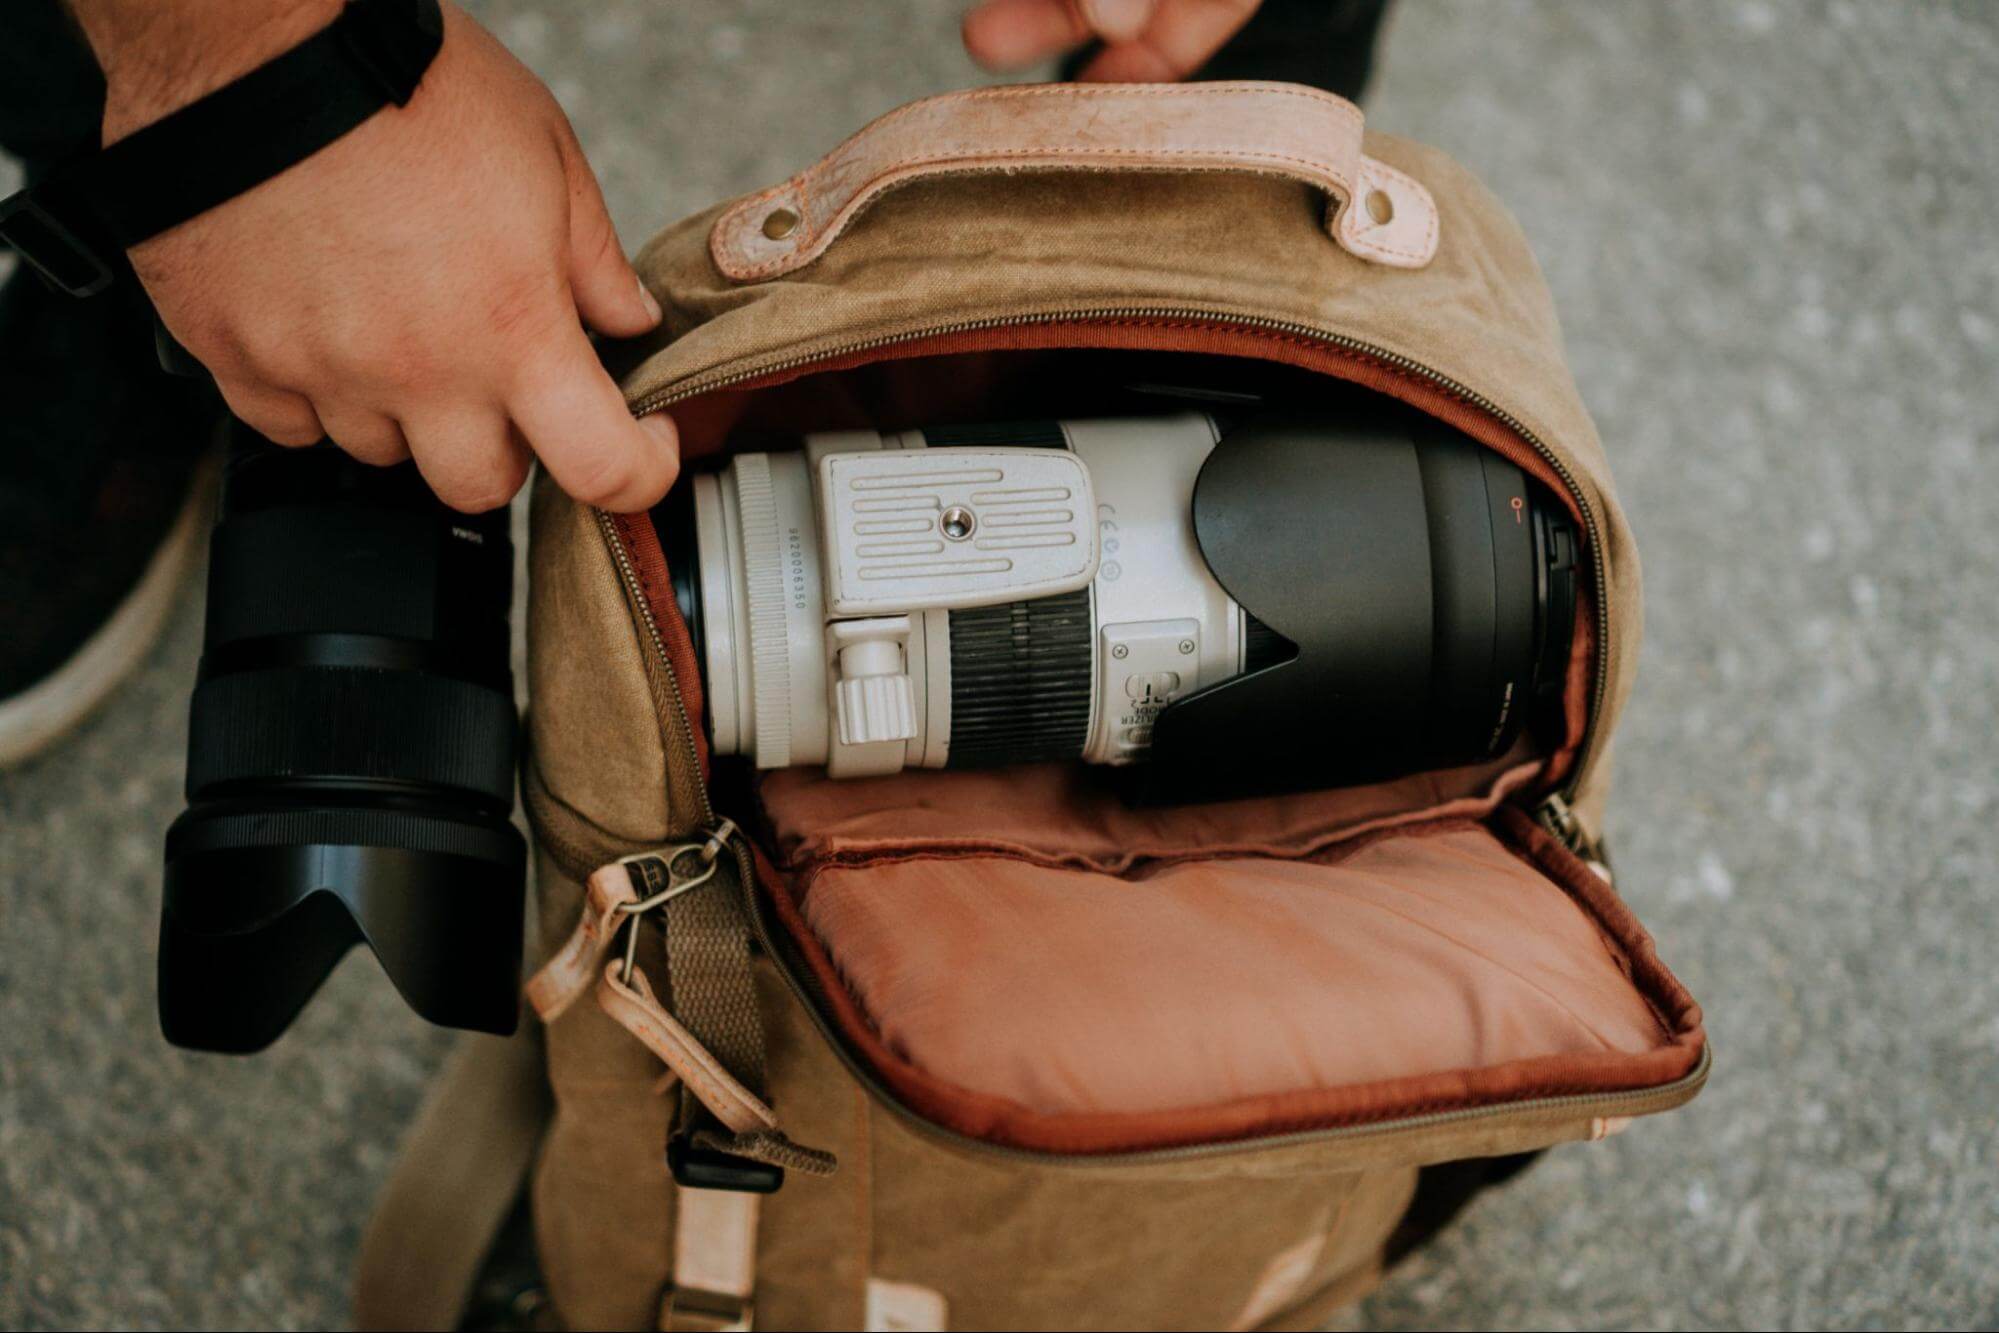 Traveler taking out white camera lens from his backpack to maximize every square inch of storage